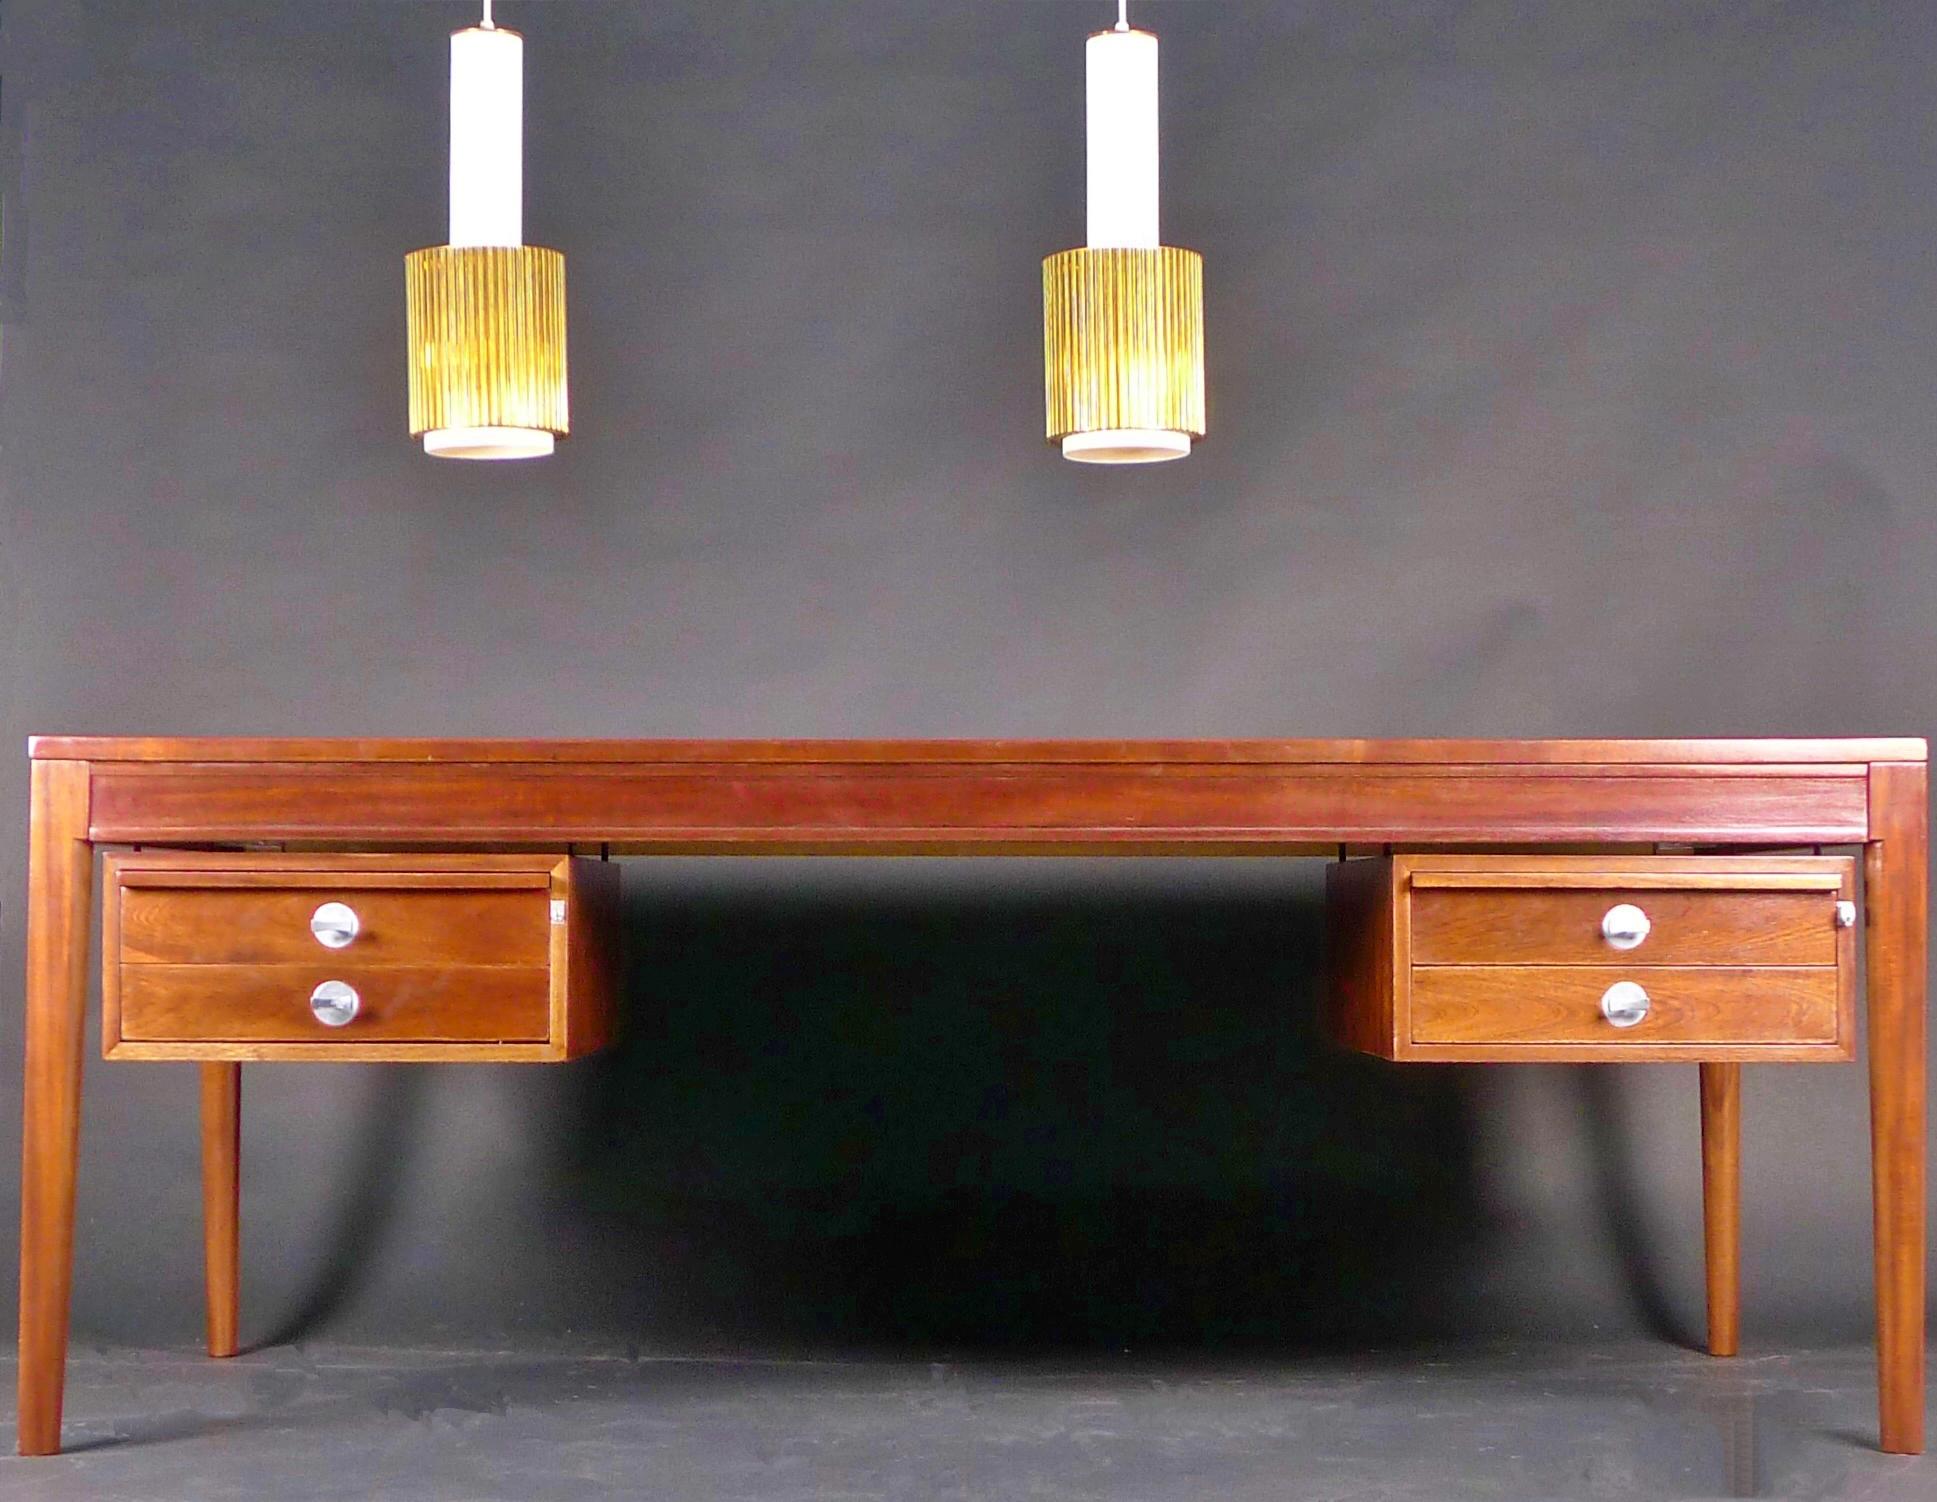 Finn Juhl 'Diplomat' executive desk in rosewood, fitted two drawers to each side with aluminium pulls below a pullout lined with felt/glass.
Designed circa 1957 and likely manufactured in early 1960s by France & Søn, Denmark.
Condition good.
190cm